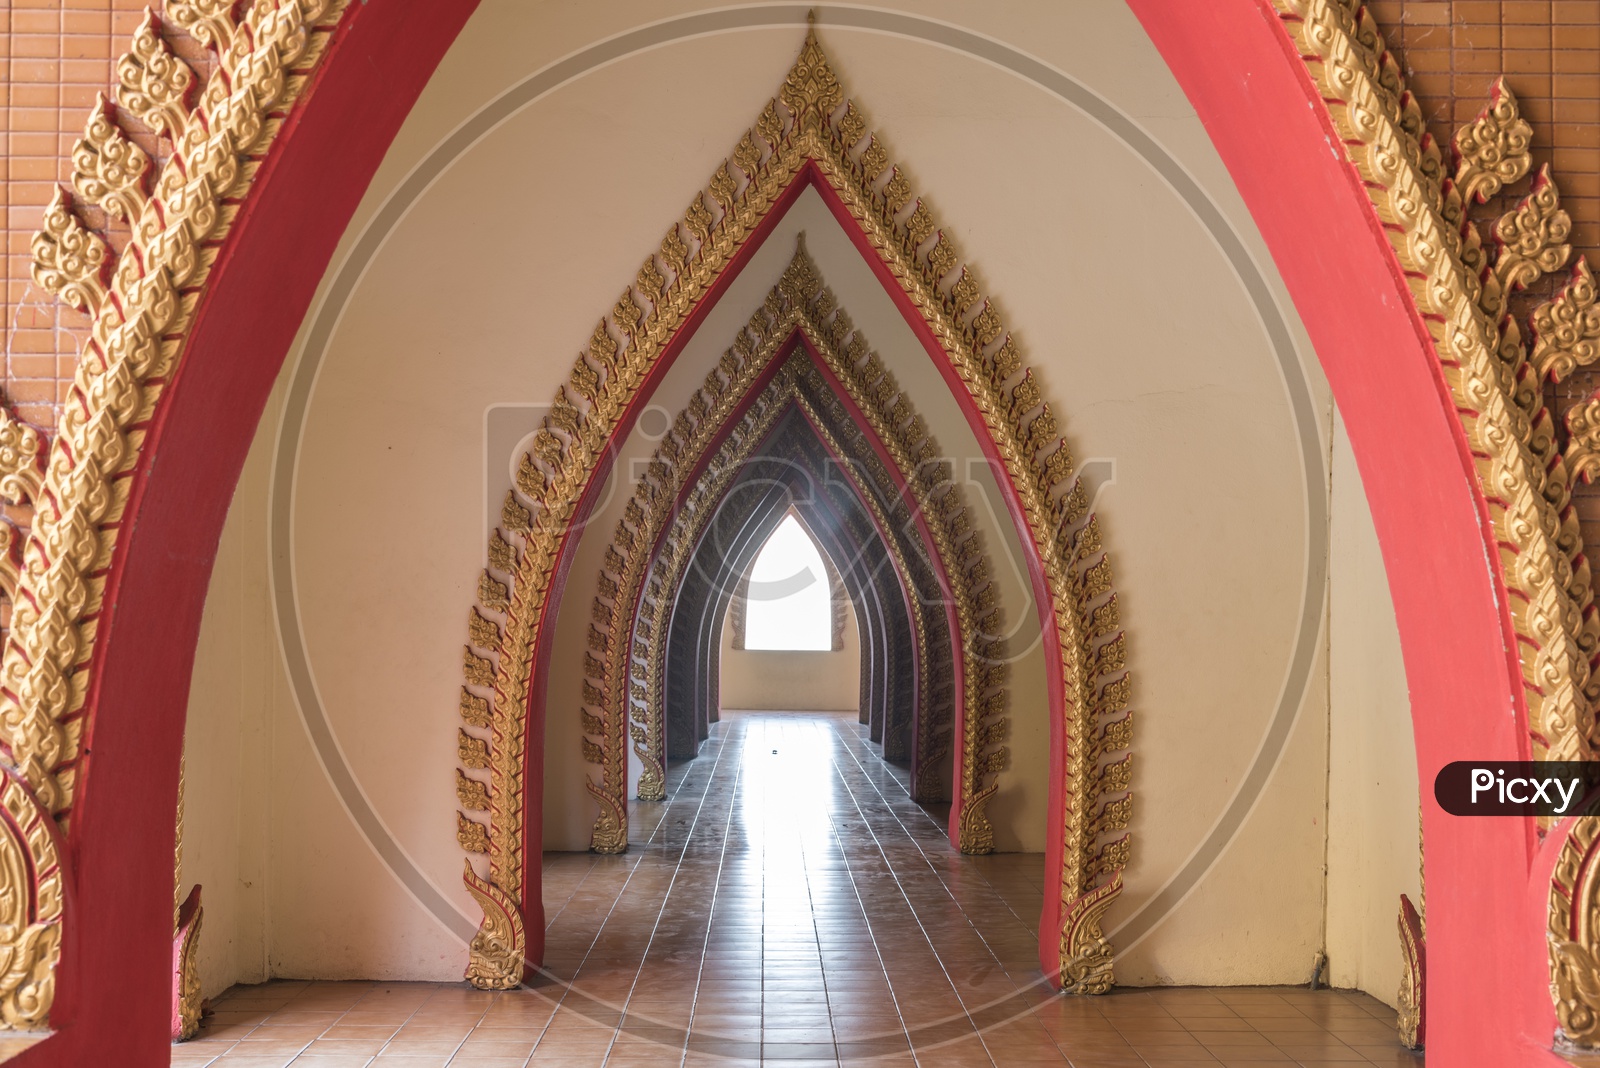 Architecture of Thai Temple With Arch Door Entrance